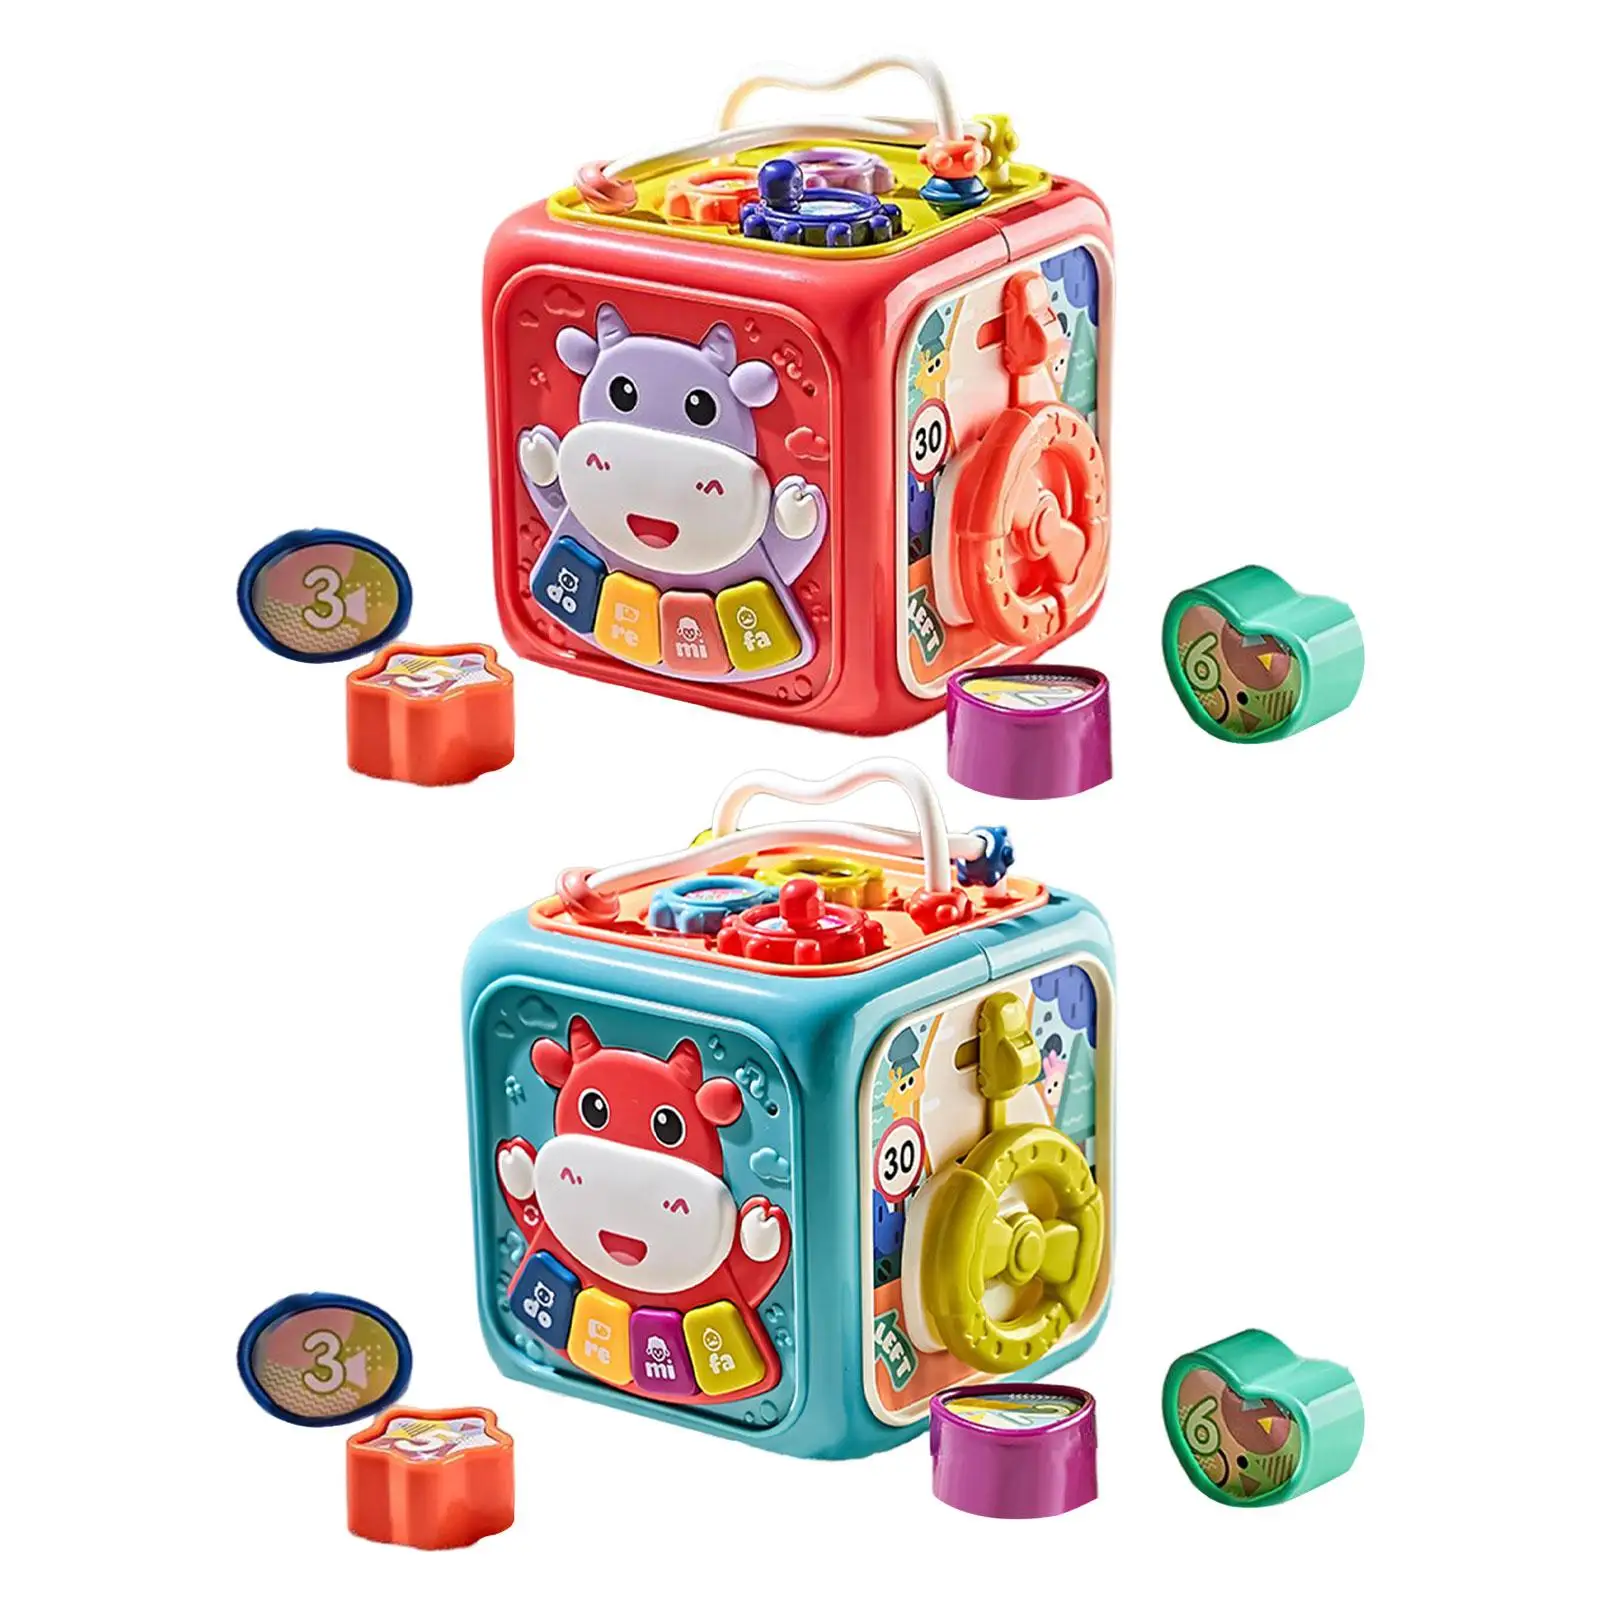 Activity Cube Baby Toy for Age 1 + Year Old Boys Girls Birthday Gift